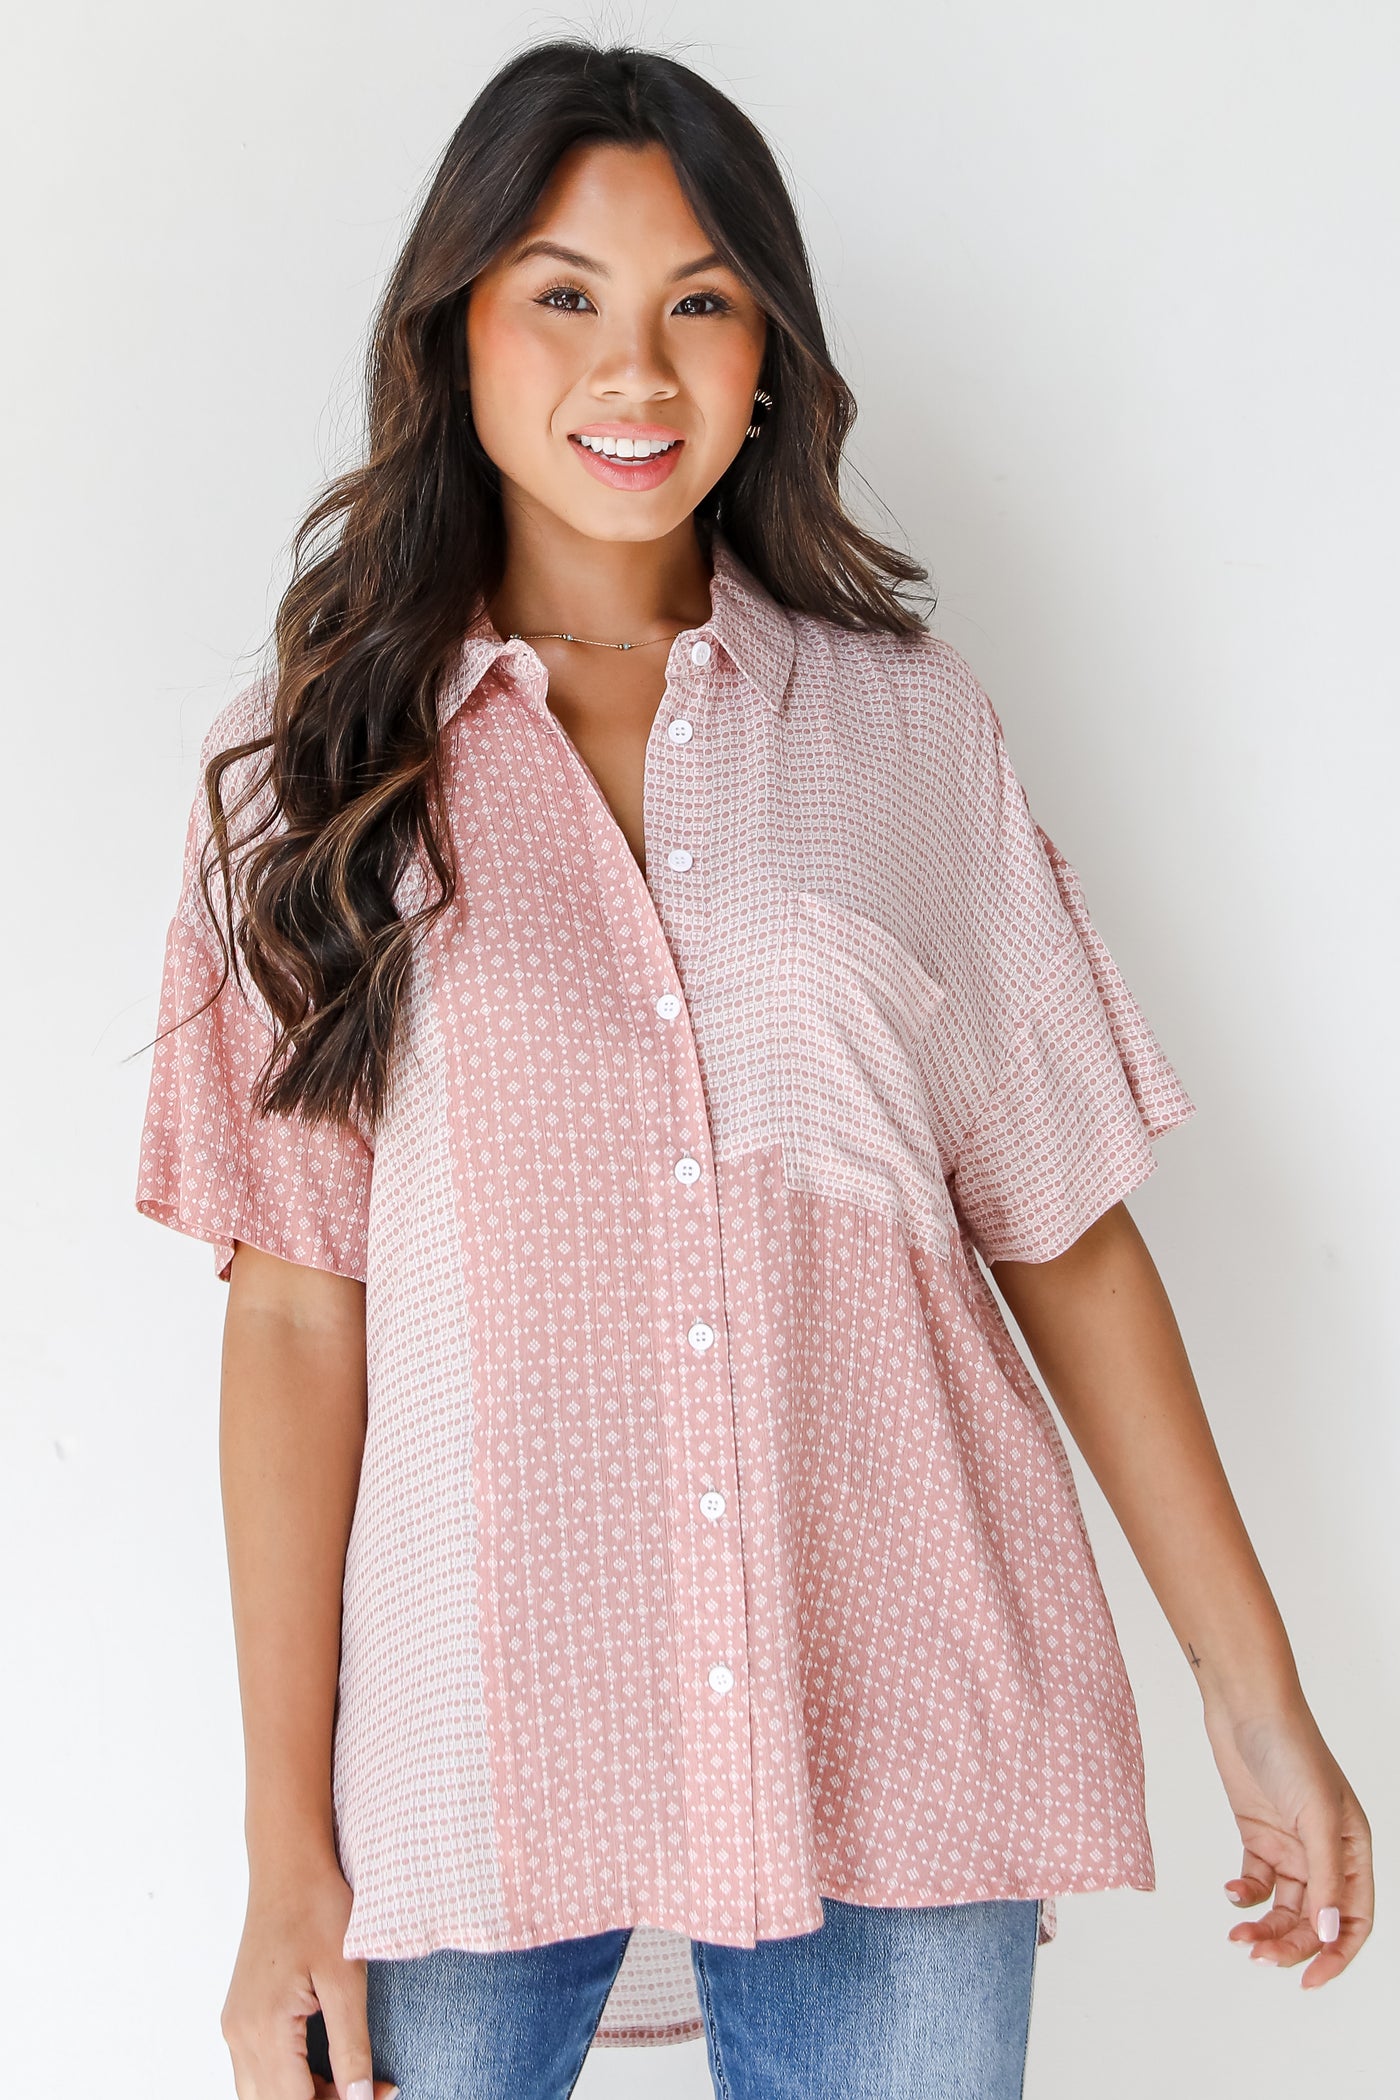 model wearing a pink short sleeve Patchwork Blouse